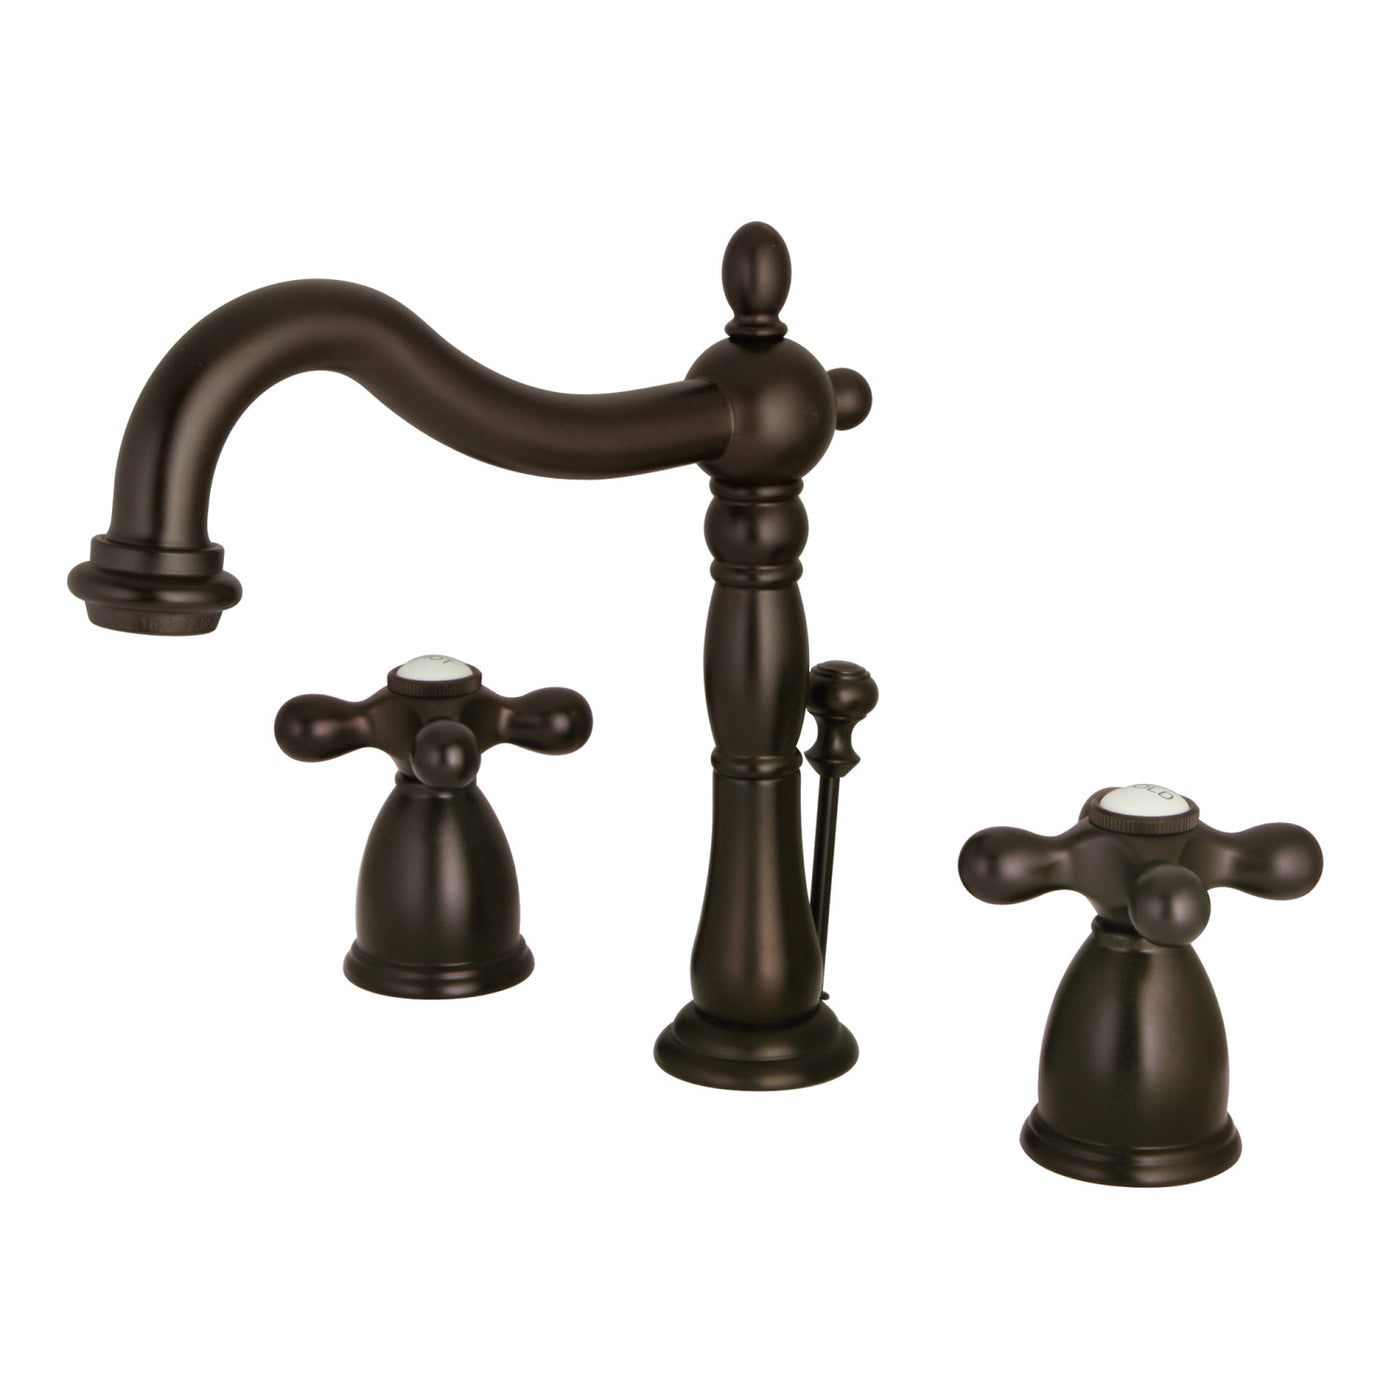 Elements of Design EB1975AX Widespread Bathroom Faucet with Plastic Pop-Up, Oil Rubbed Bronze